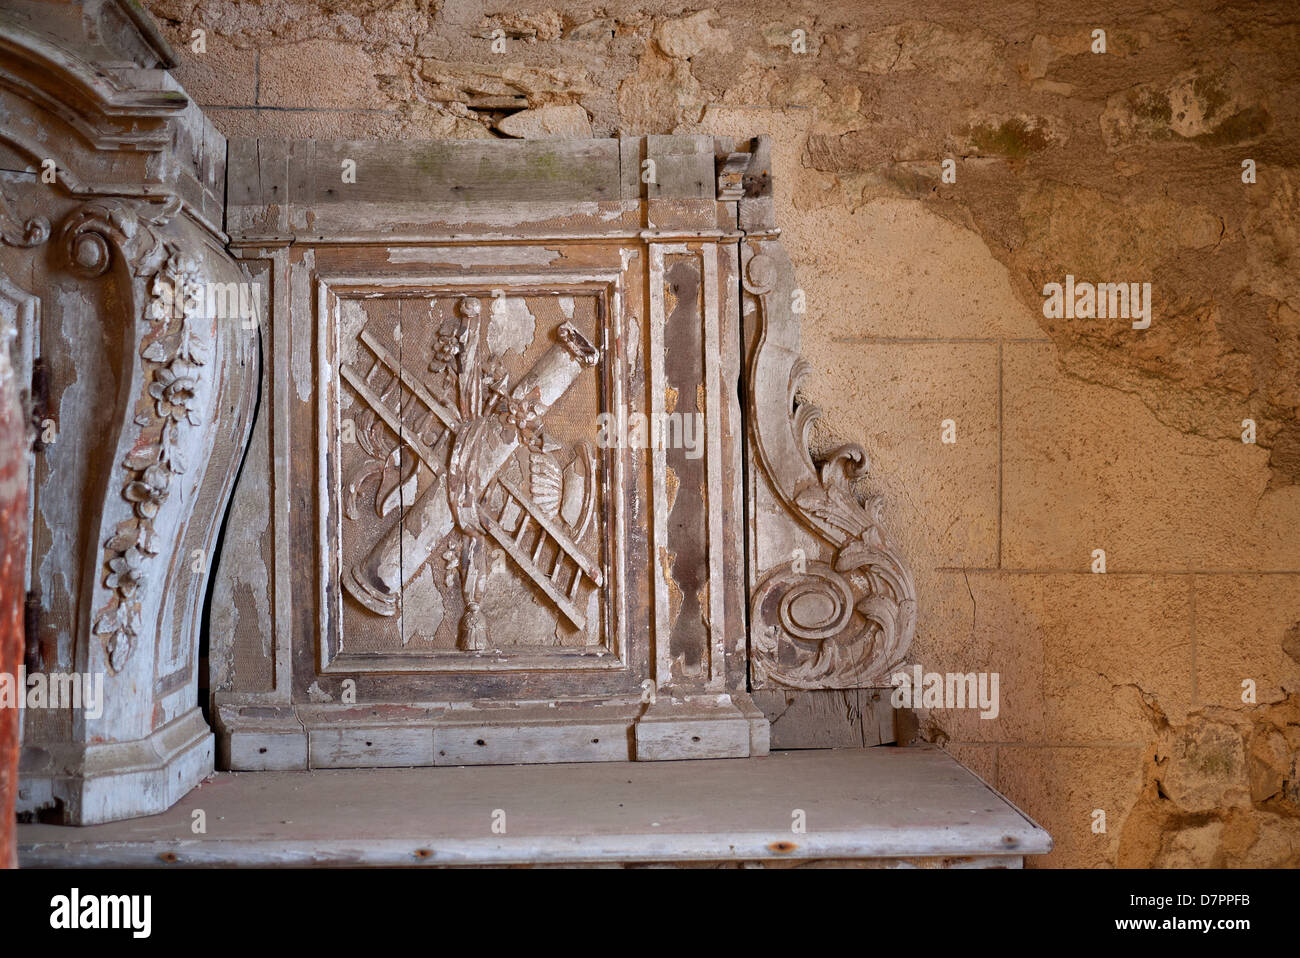 Oradour-sur-Glane near Limoges in France. Remains of wood carvings in the church. Stock Photo